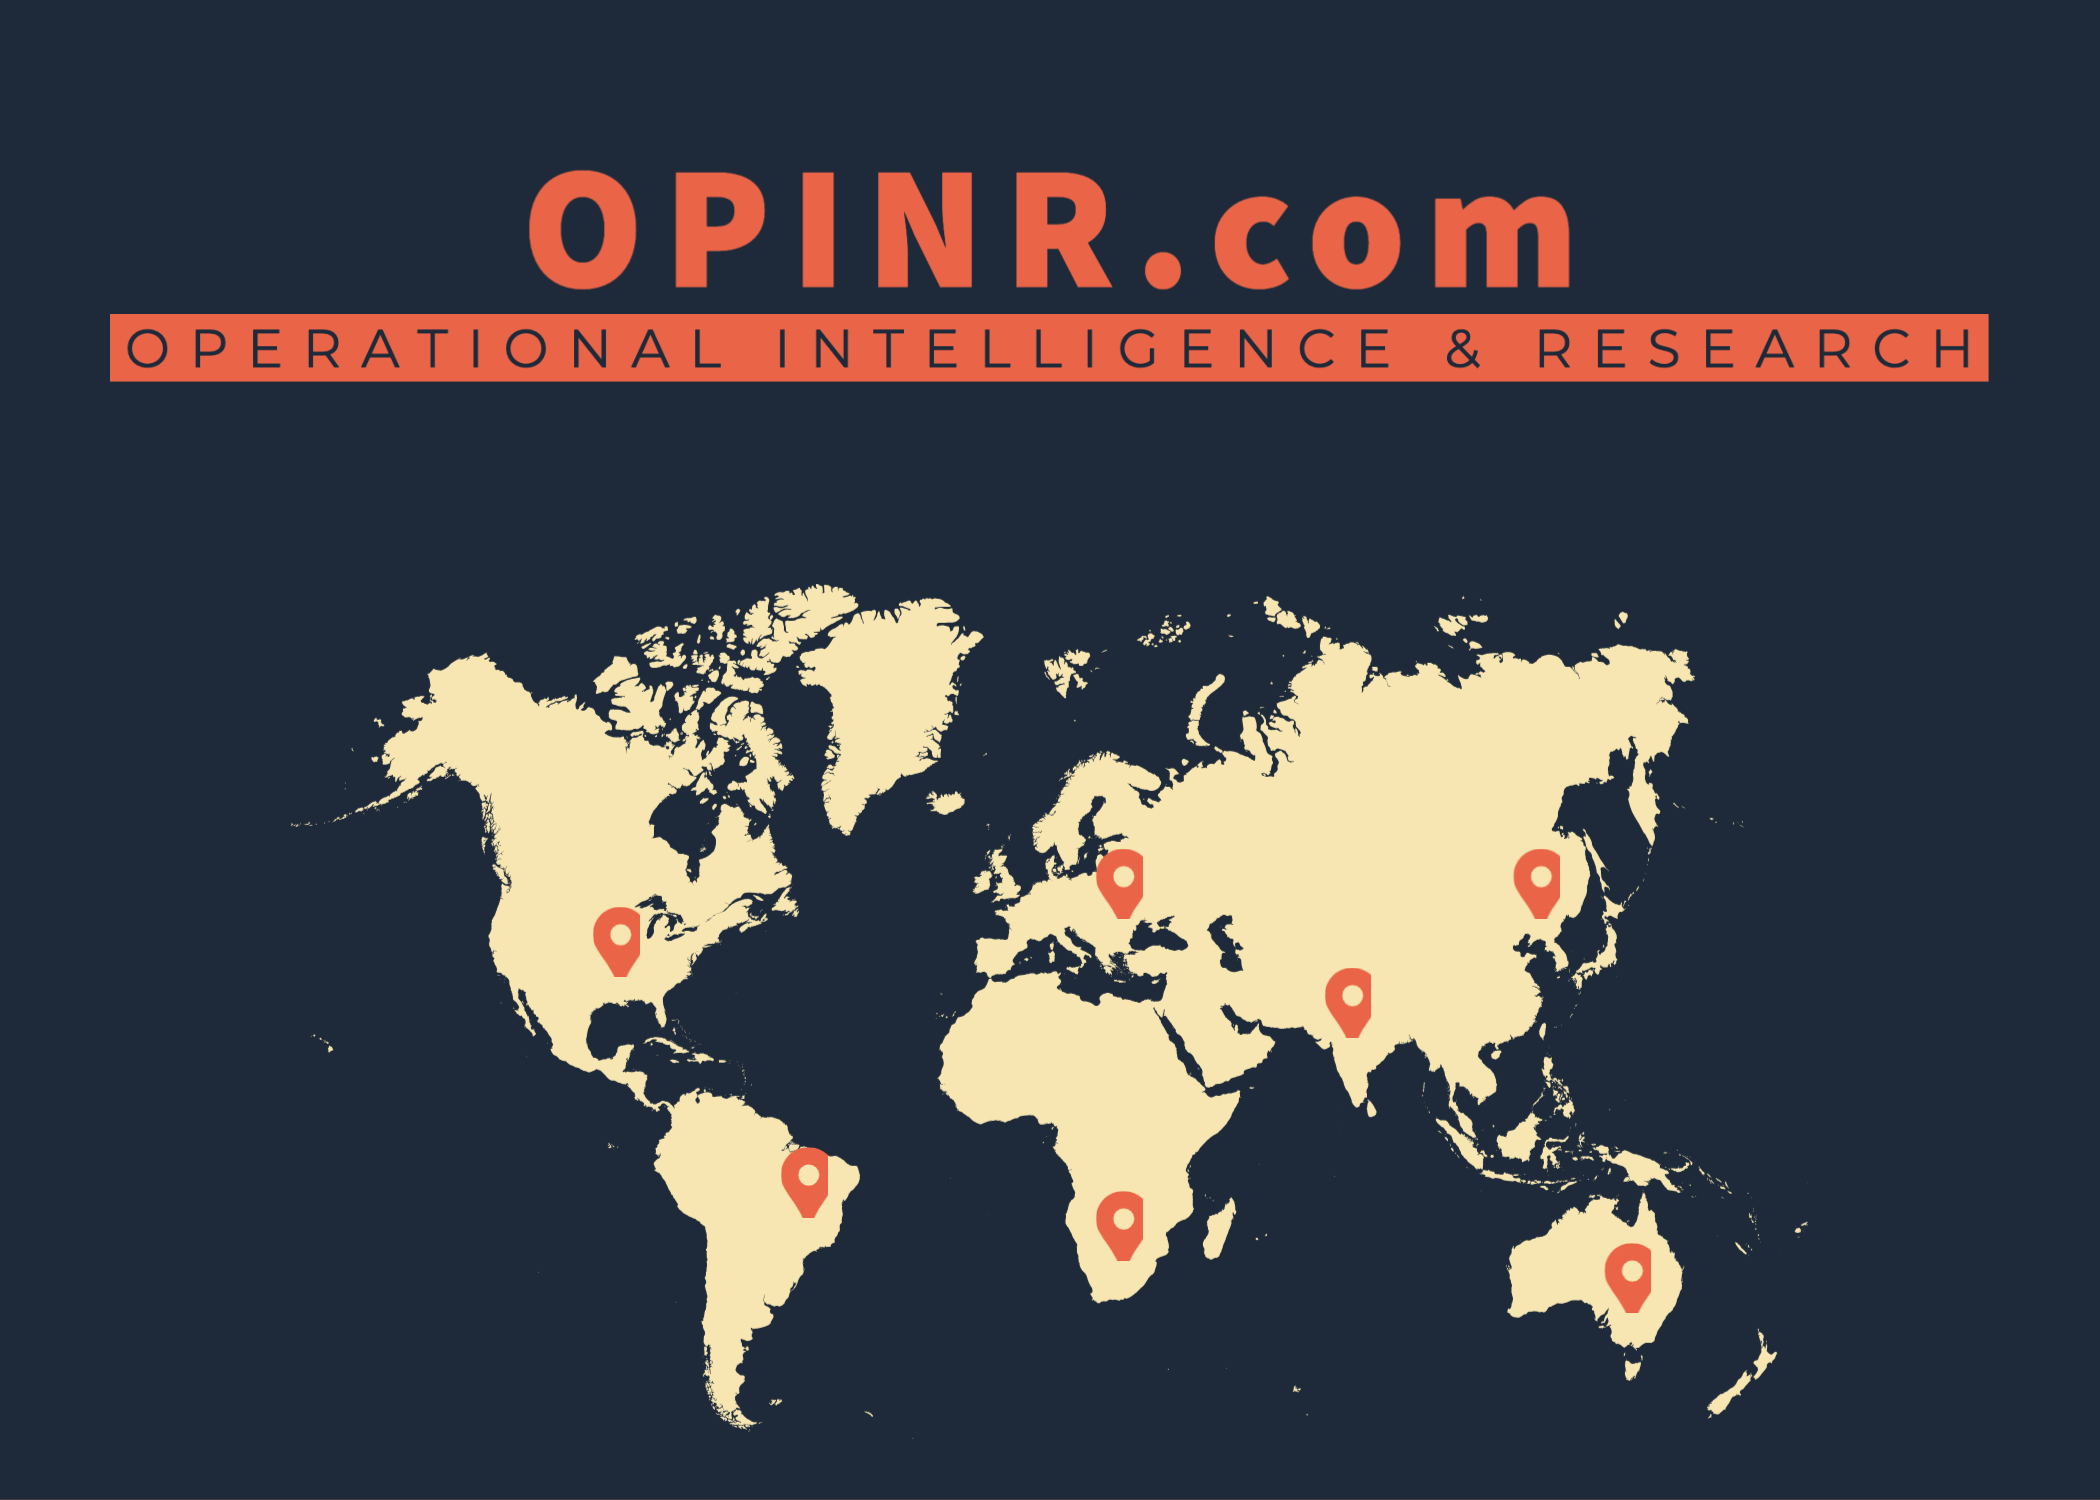 OPINR stands for Operational Intelligence and Research